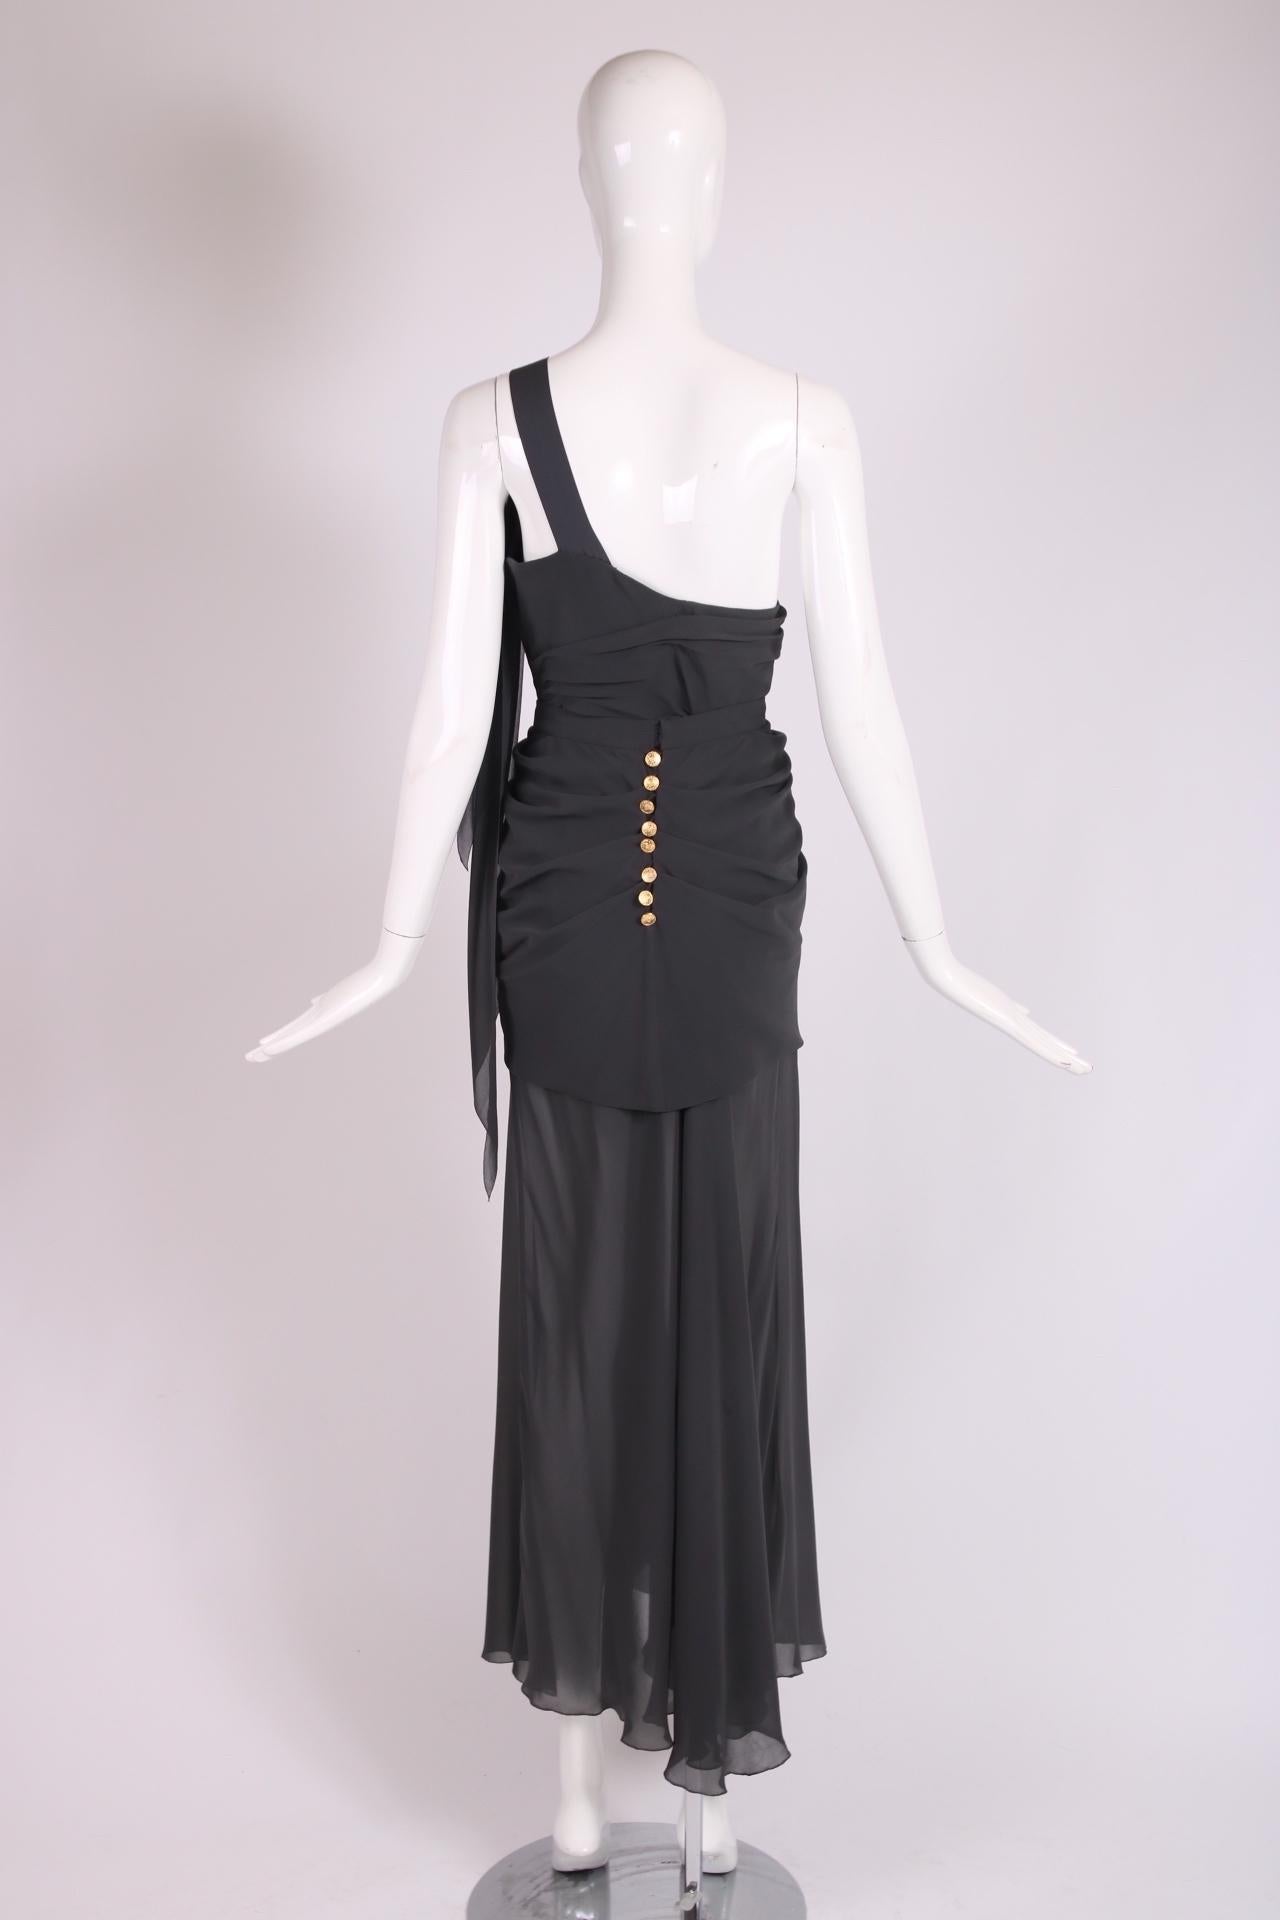 1989 Chanel Grecian-Inspired Silk Evening Ensemble In Good Condition For Sale In Studio City, CA